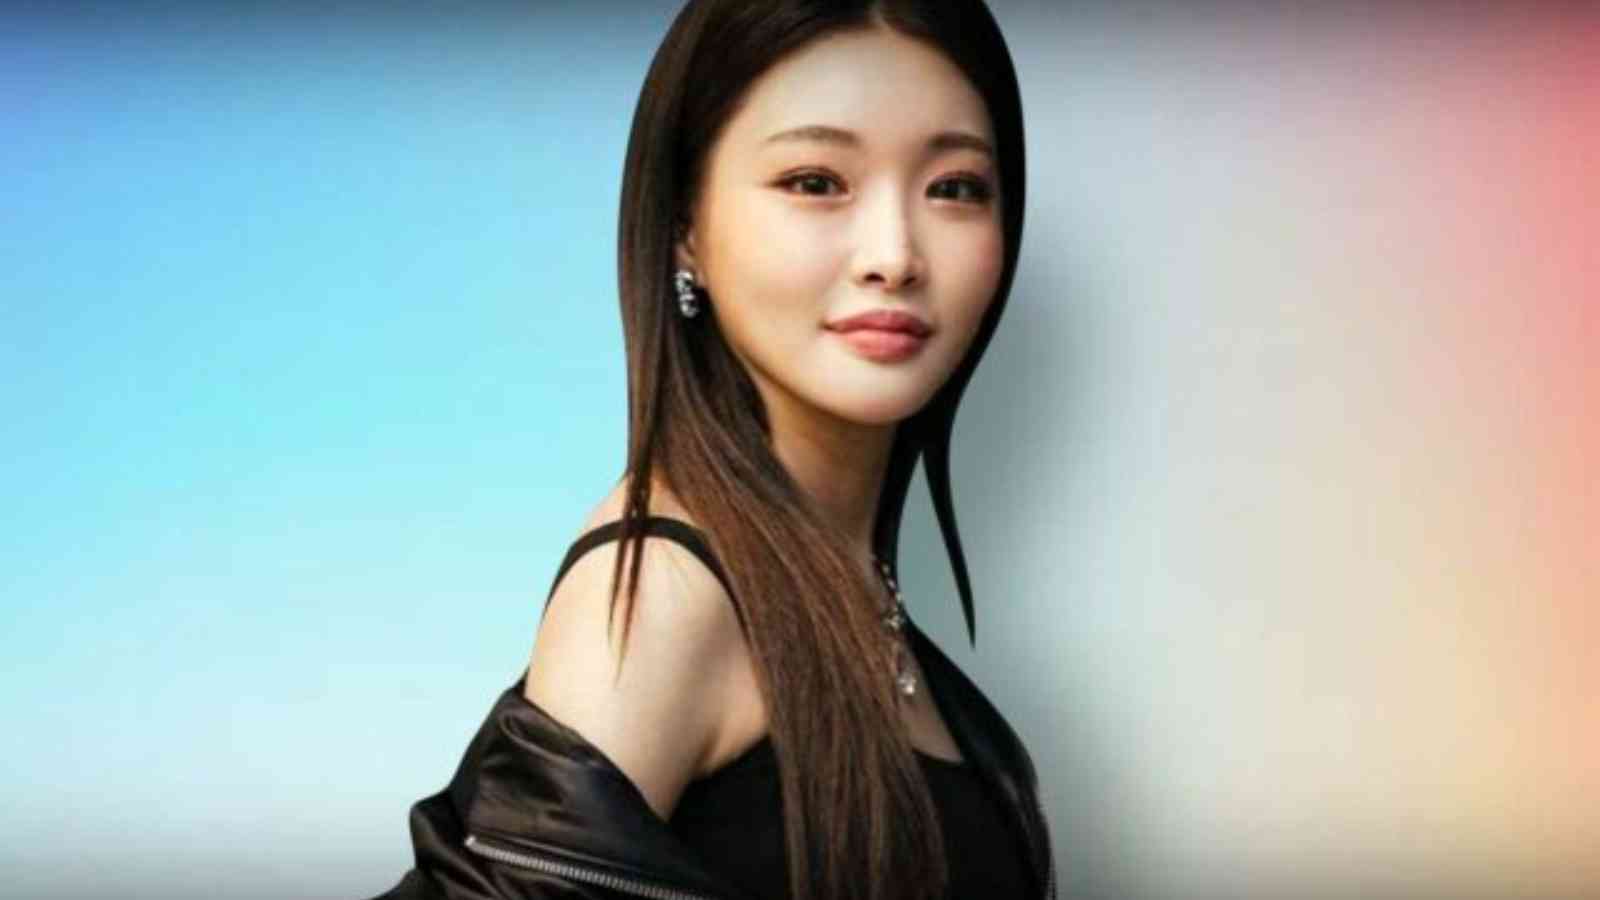 Kim Chung-ha Biography: Kim Chung-ha, also referred to as Chung Ha, was born on February 9th, 1996 and has since grown to be a well-known